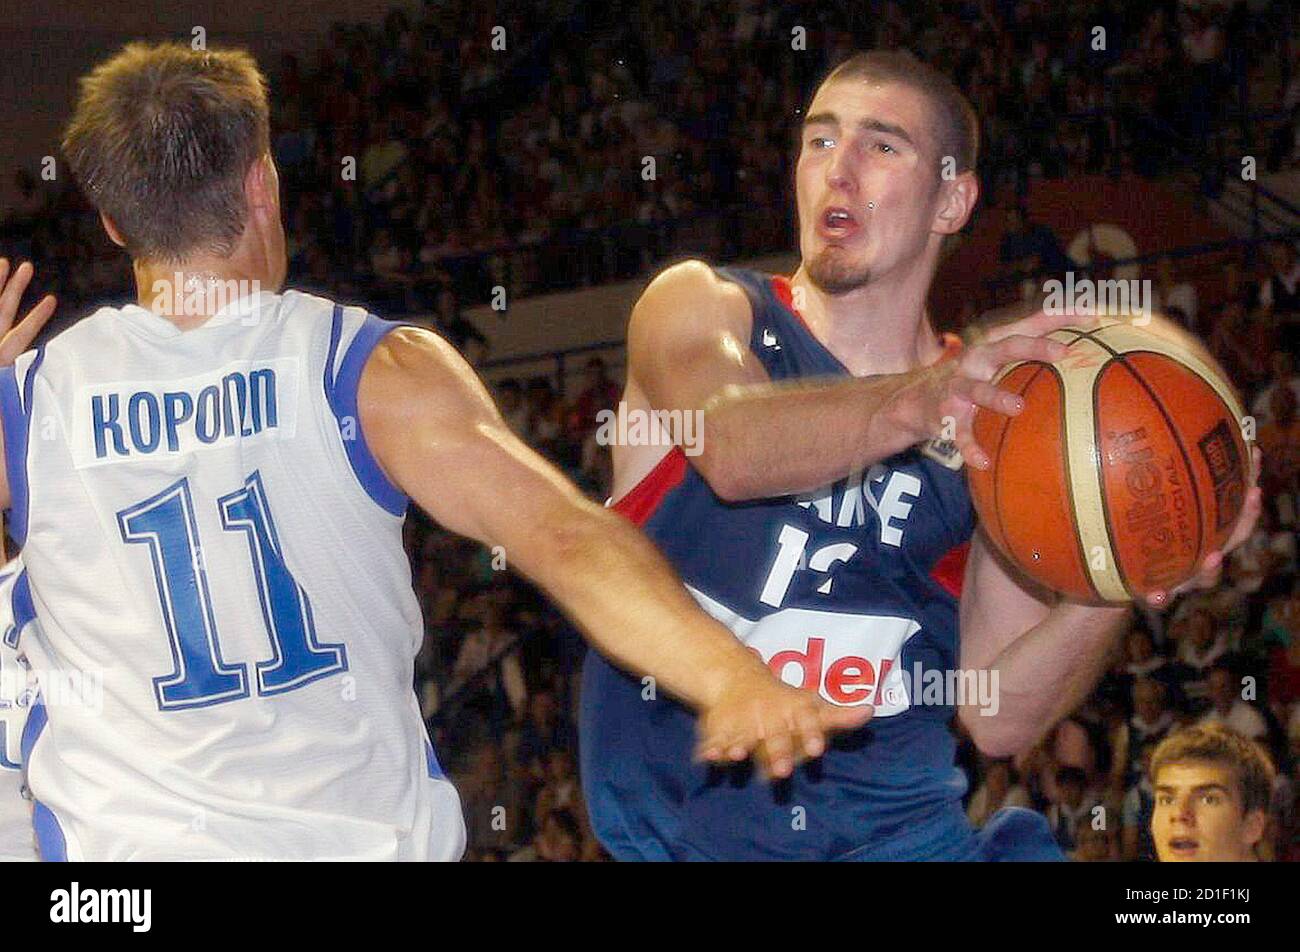 France's Nando De Colo (R) goes to basket against Finland's Petteri Koponen  during the Euro 2009 qualifying basketball game in Pau, southwestern  France, August 8, 2009. REUTERS/Regis Duvignau (FRANCE SPORT BASKETBALL  Photo